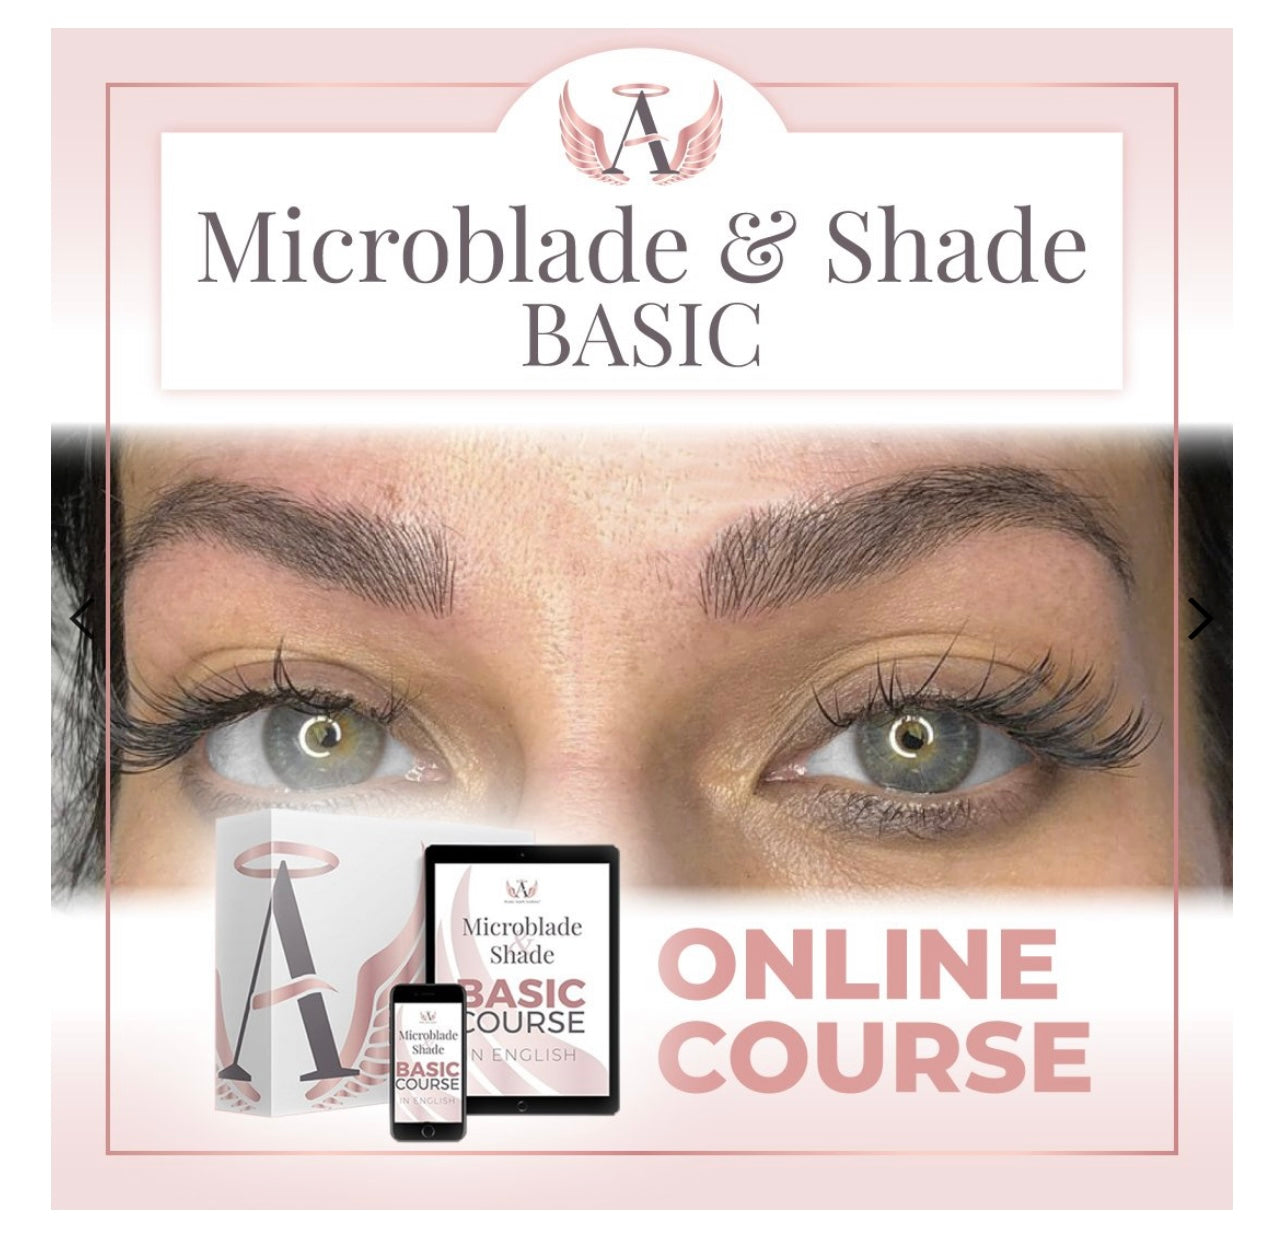 Basic Microblade & Shade Course Online